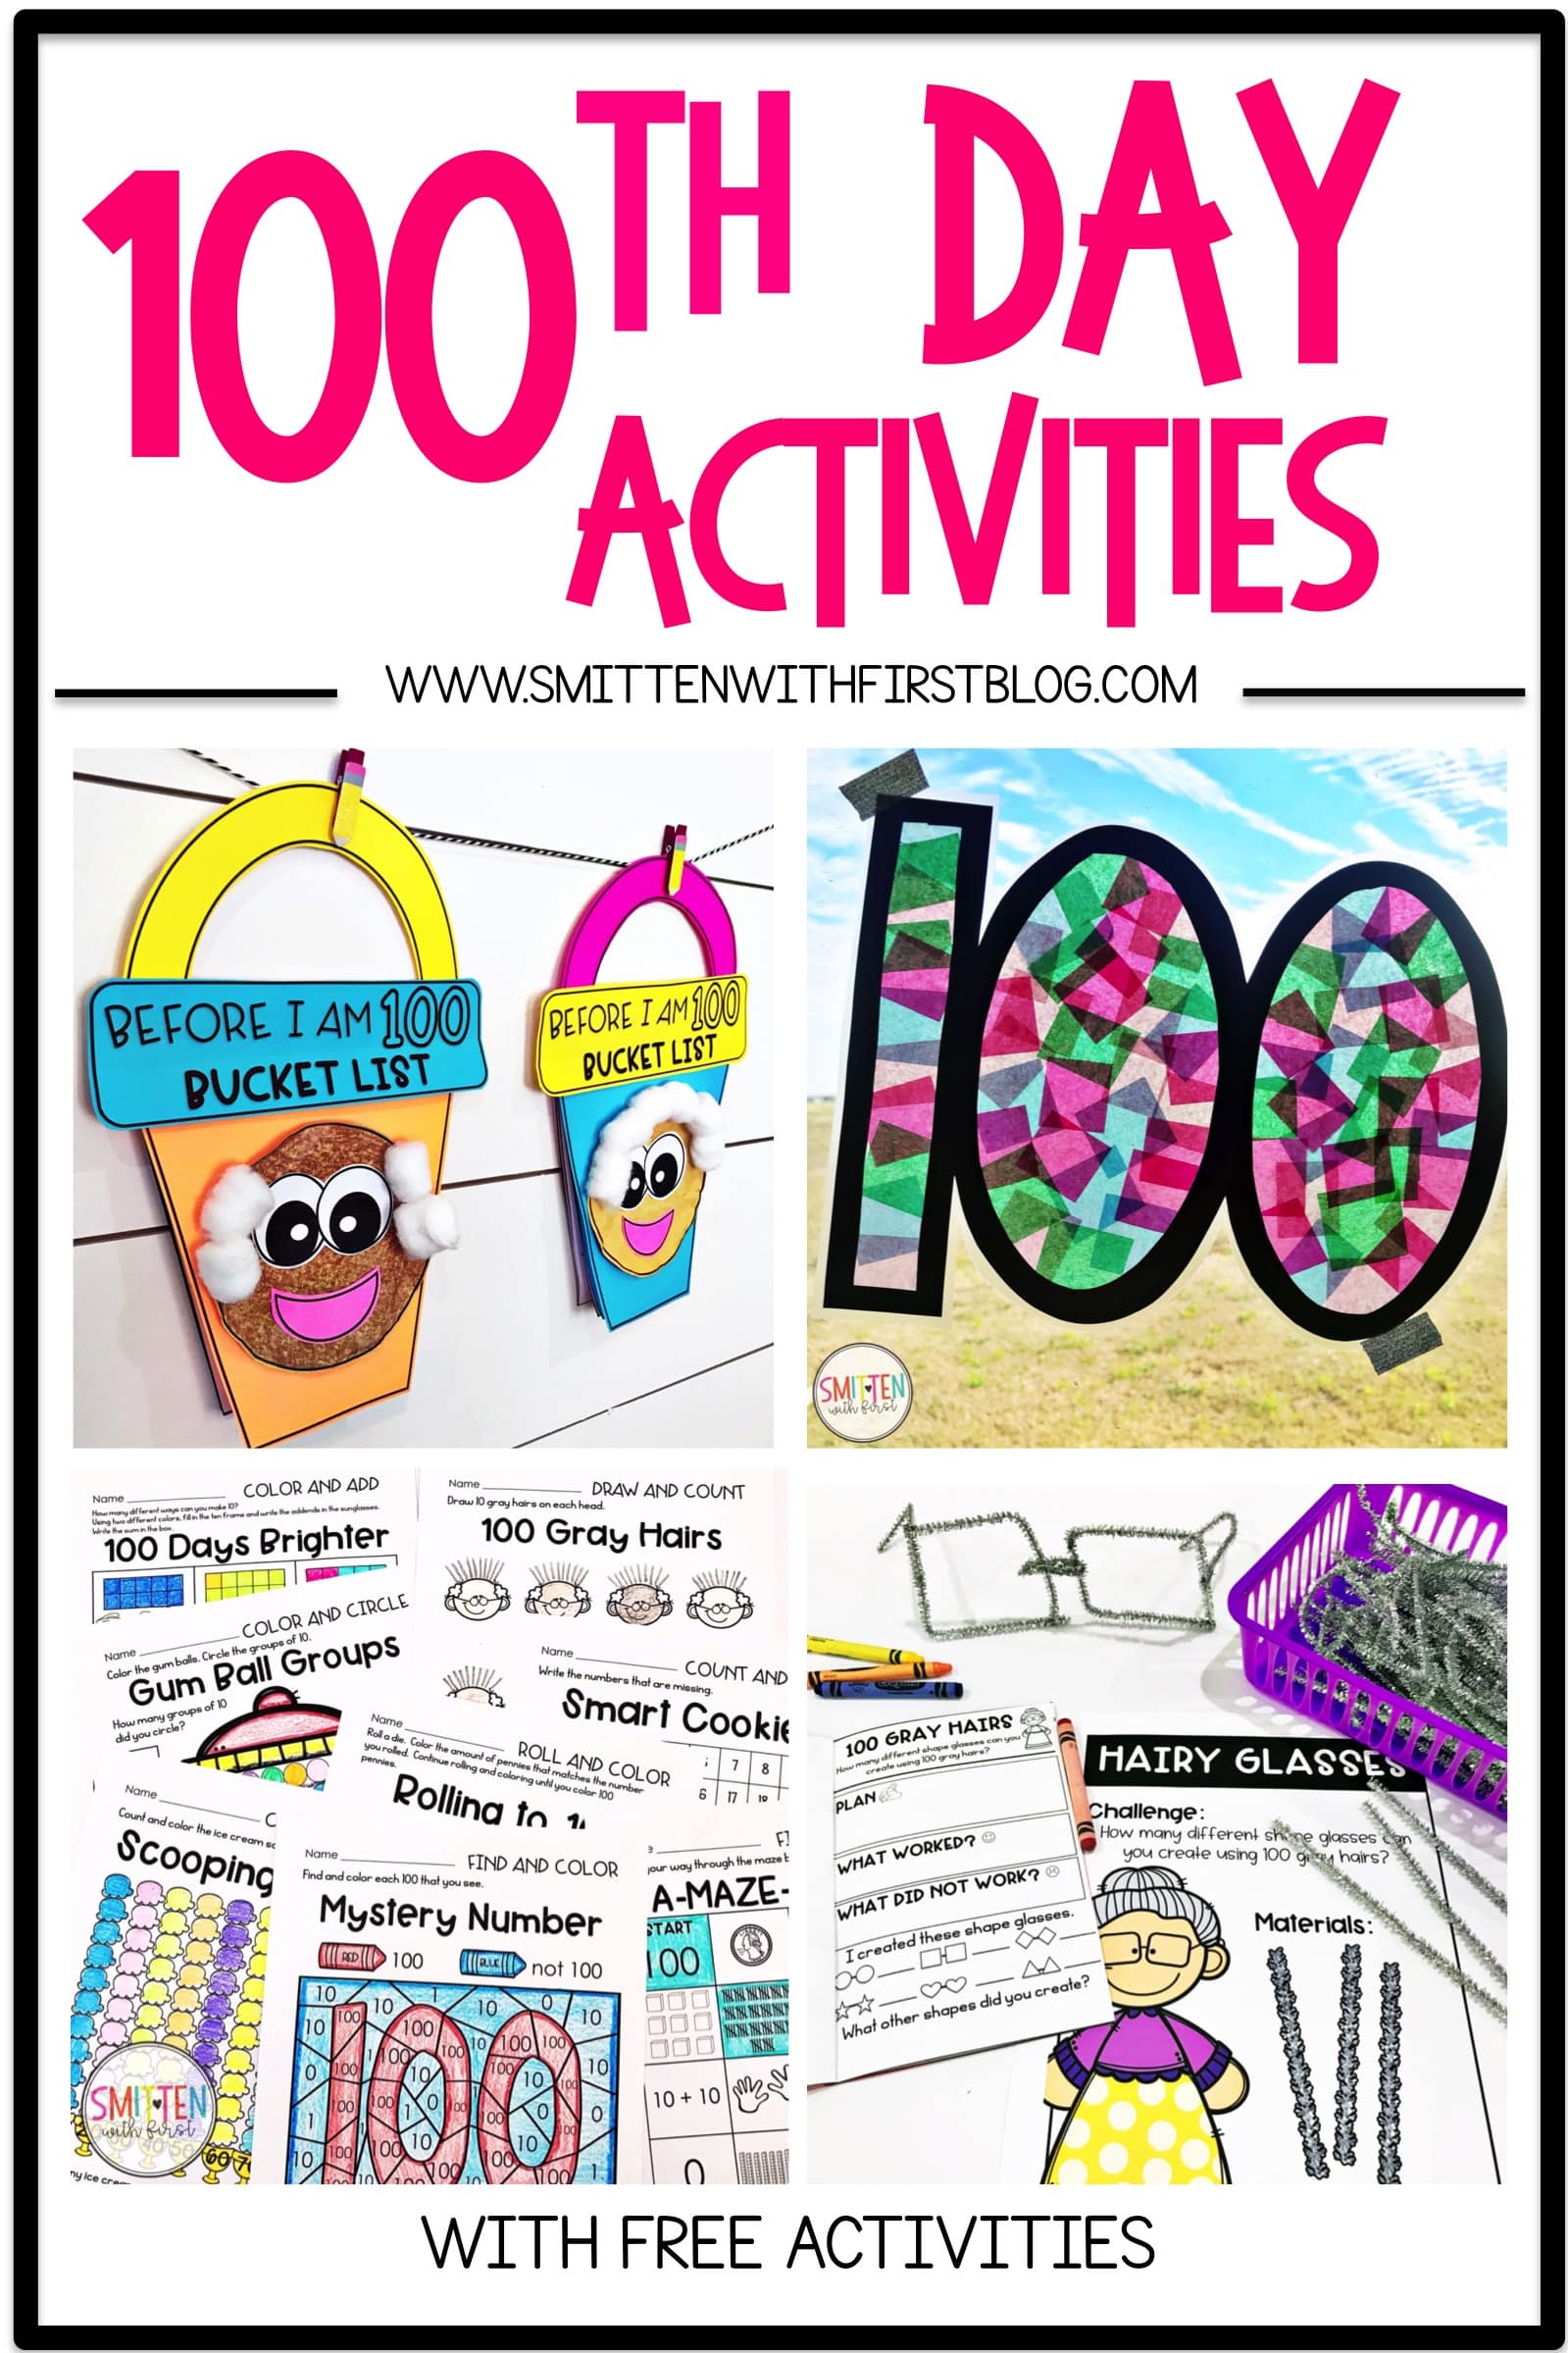 100th Day Activities